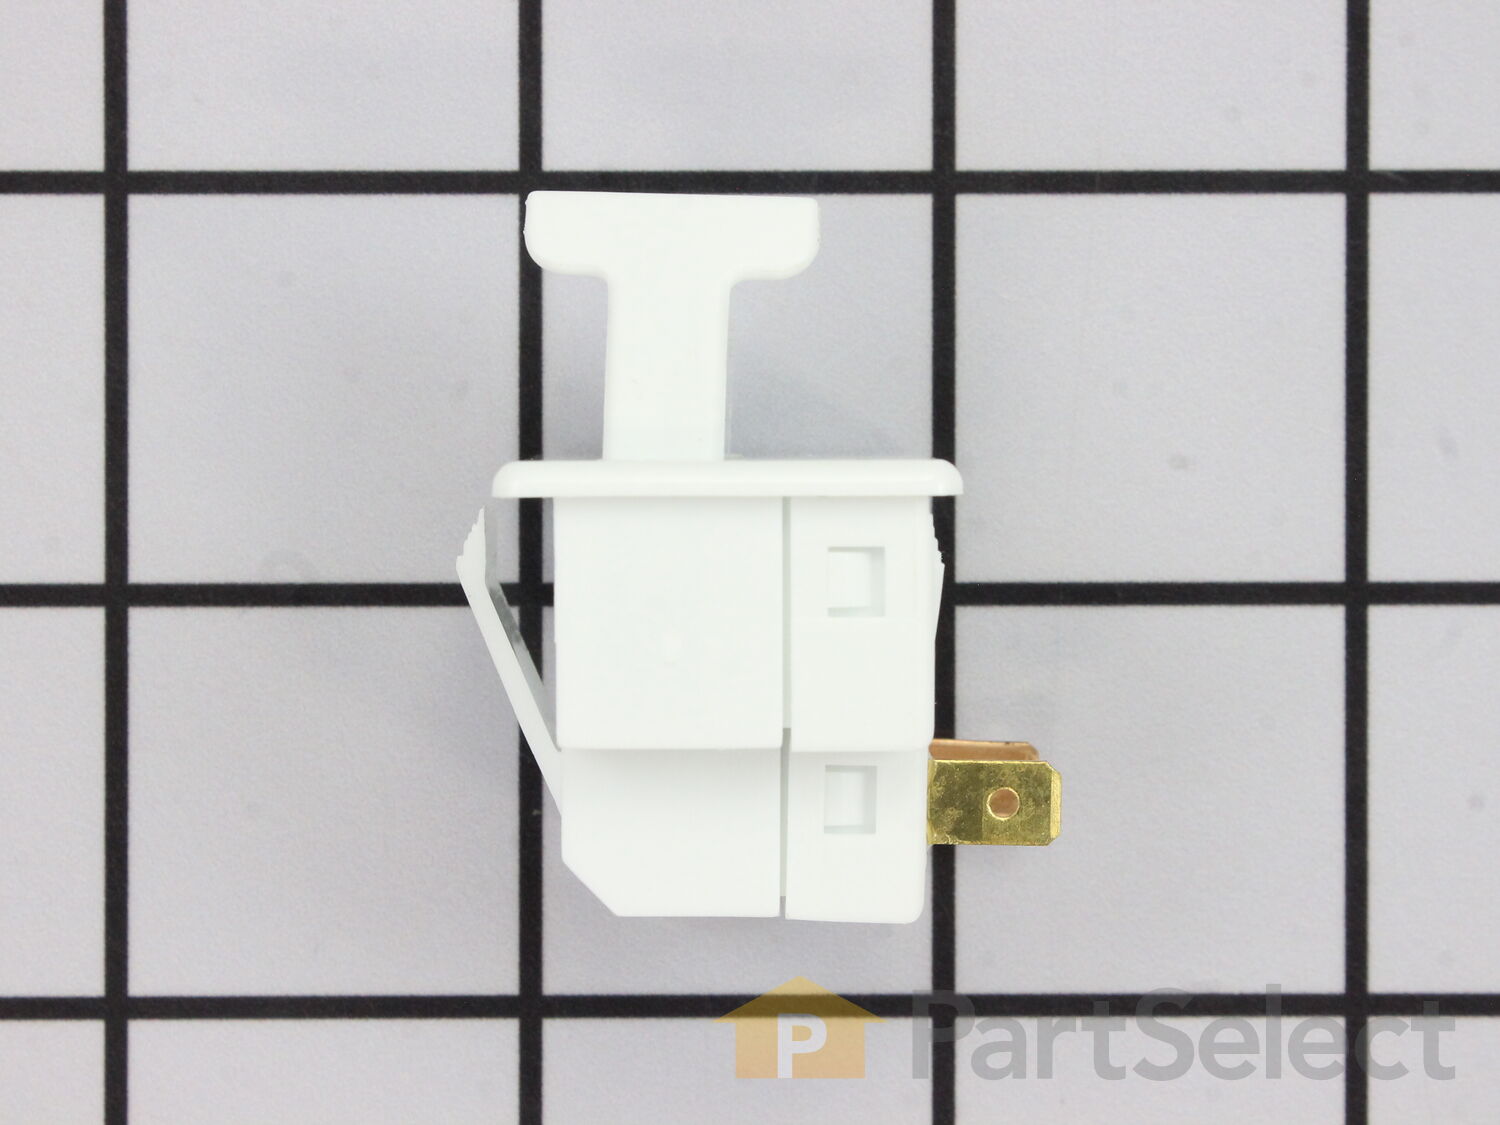 For General Electric Refrigerator Door Light Switch PB8297595X38X21 